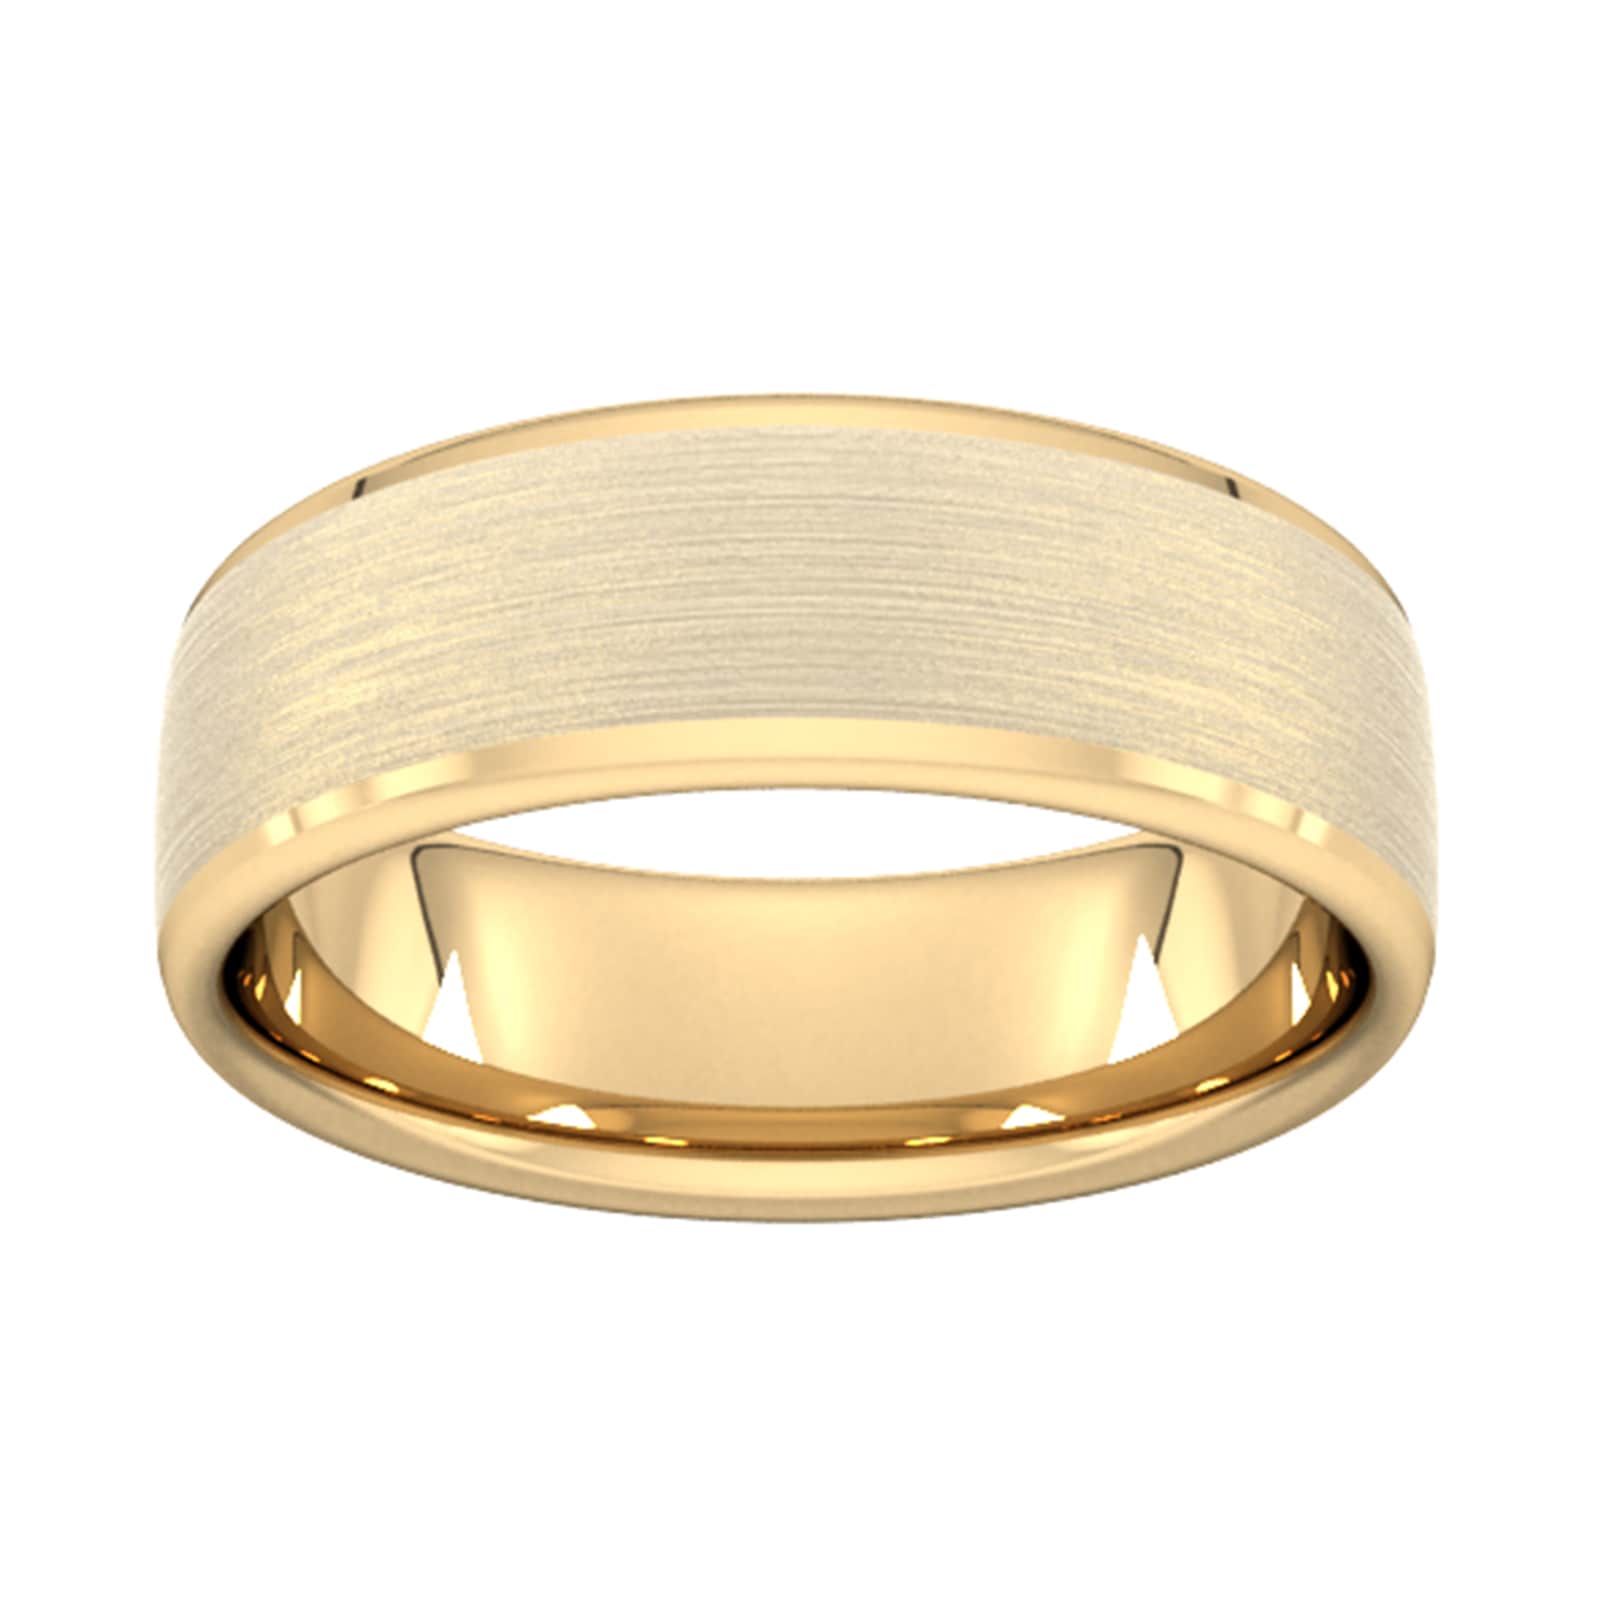 7mm Traditional Court Standard Polished Chamfered Edges With Matt Centre Wedding Ring In 9 Carat Yellow Gold - Ring Size X